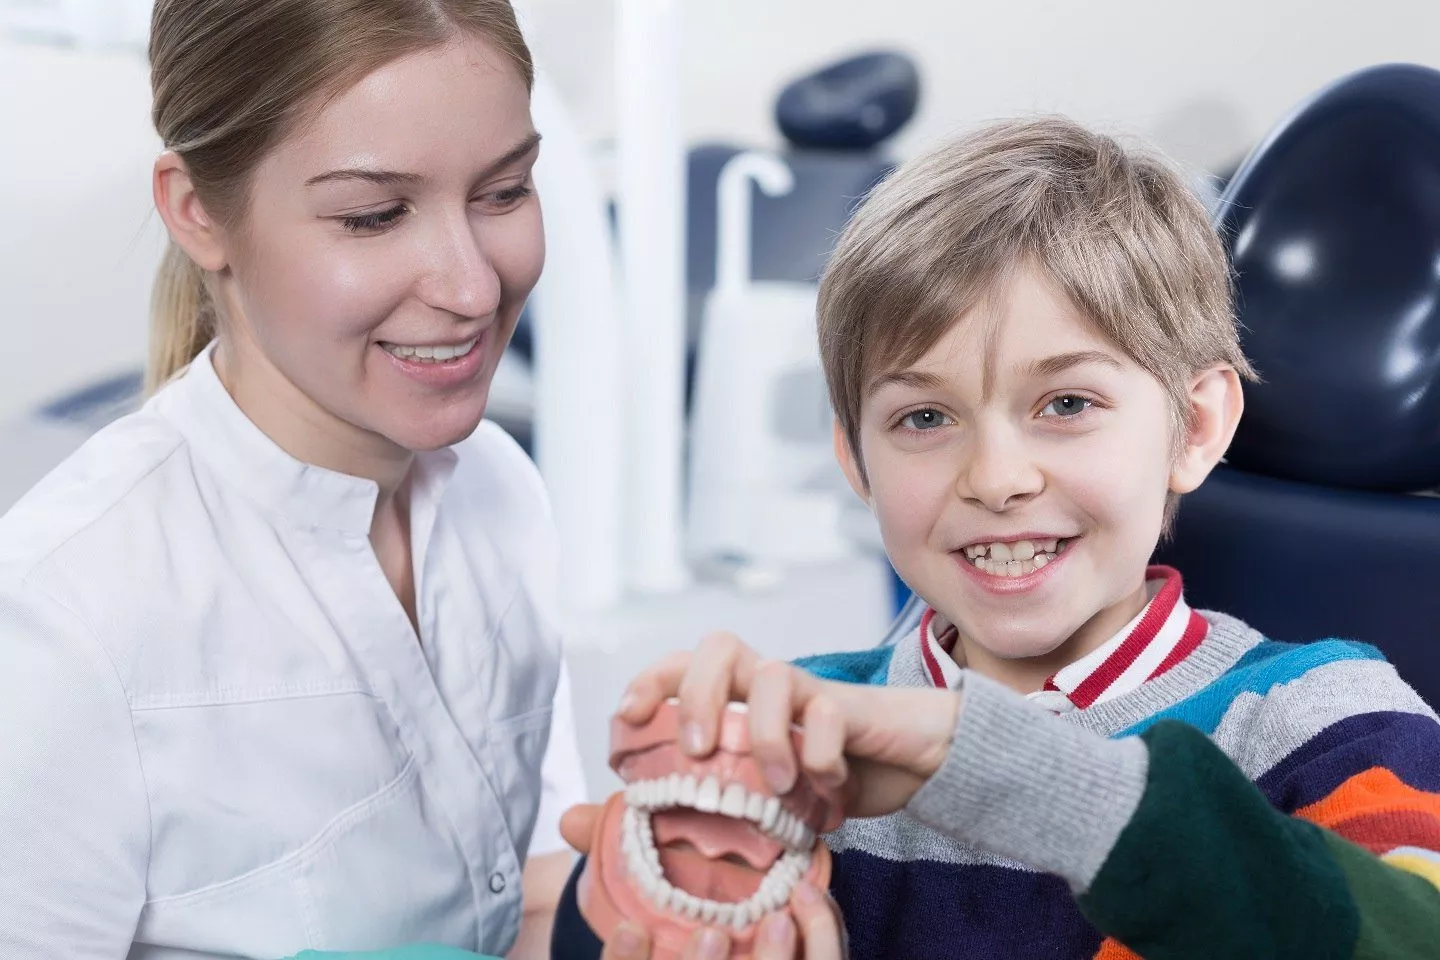 5 Ways to Make Your Clinic More Child-Friendly